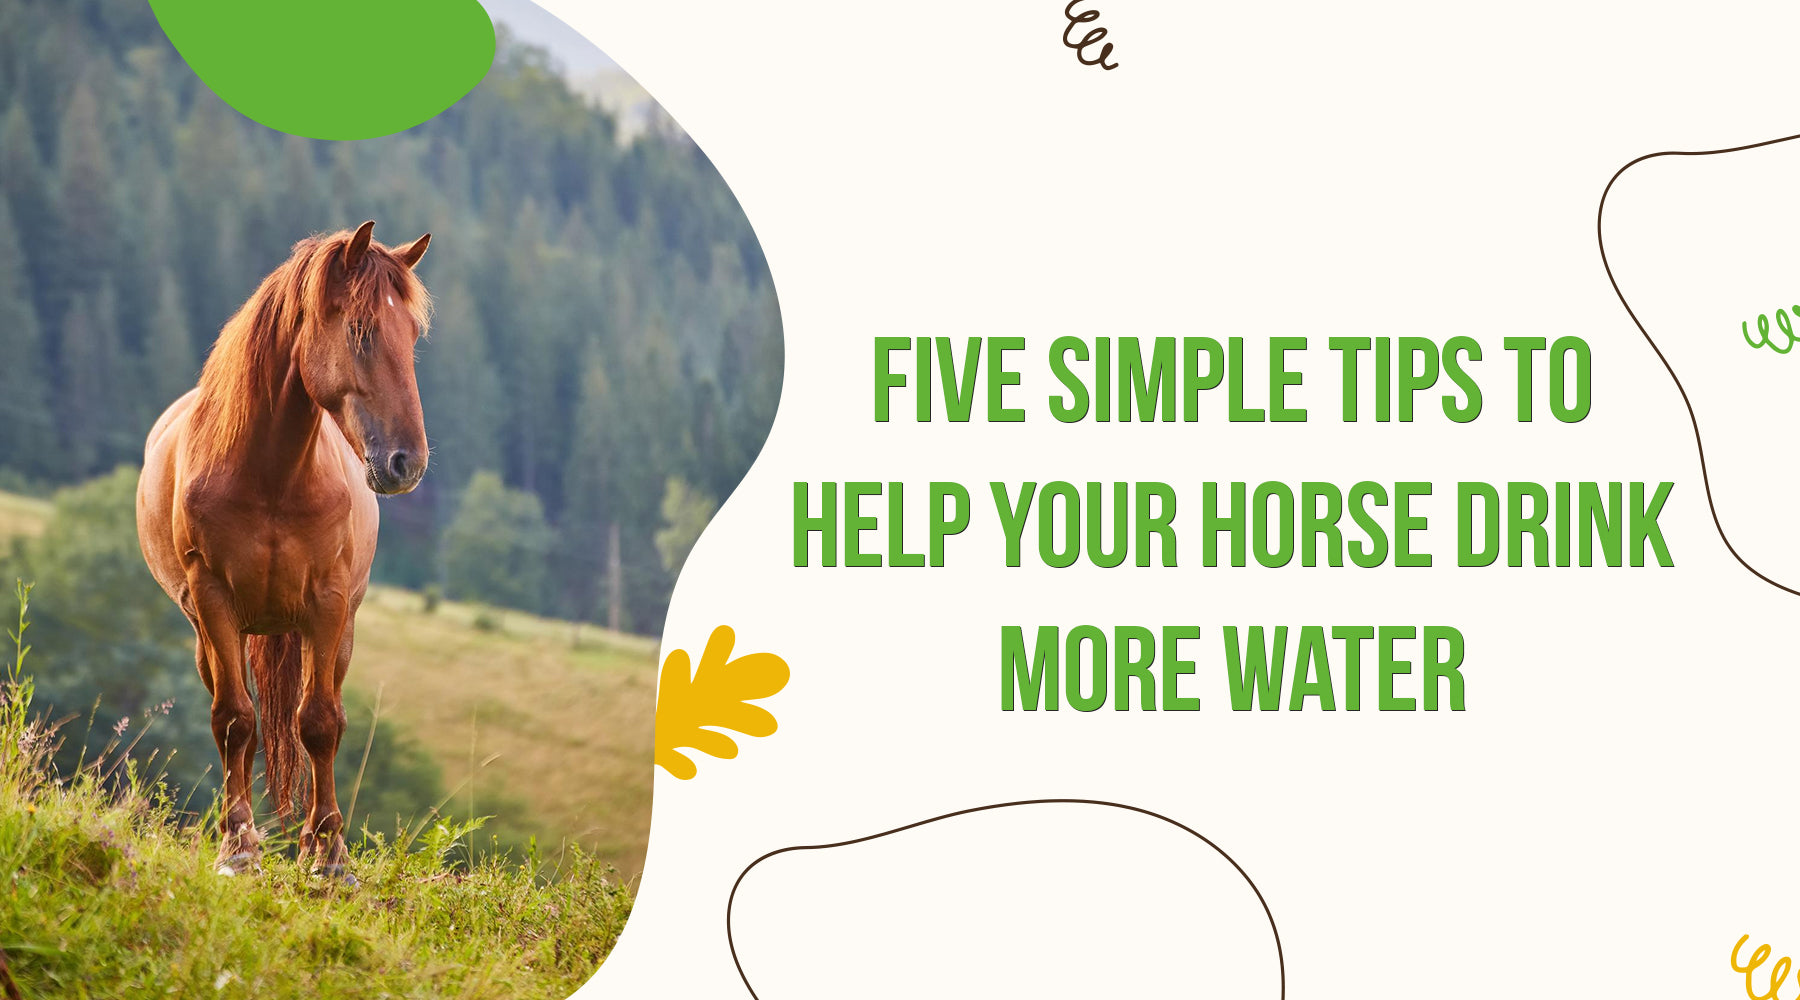 Five Simple Tips to Help Your Horse Drink More Water